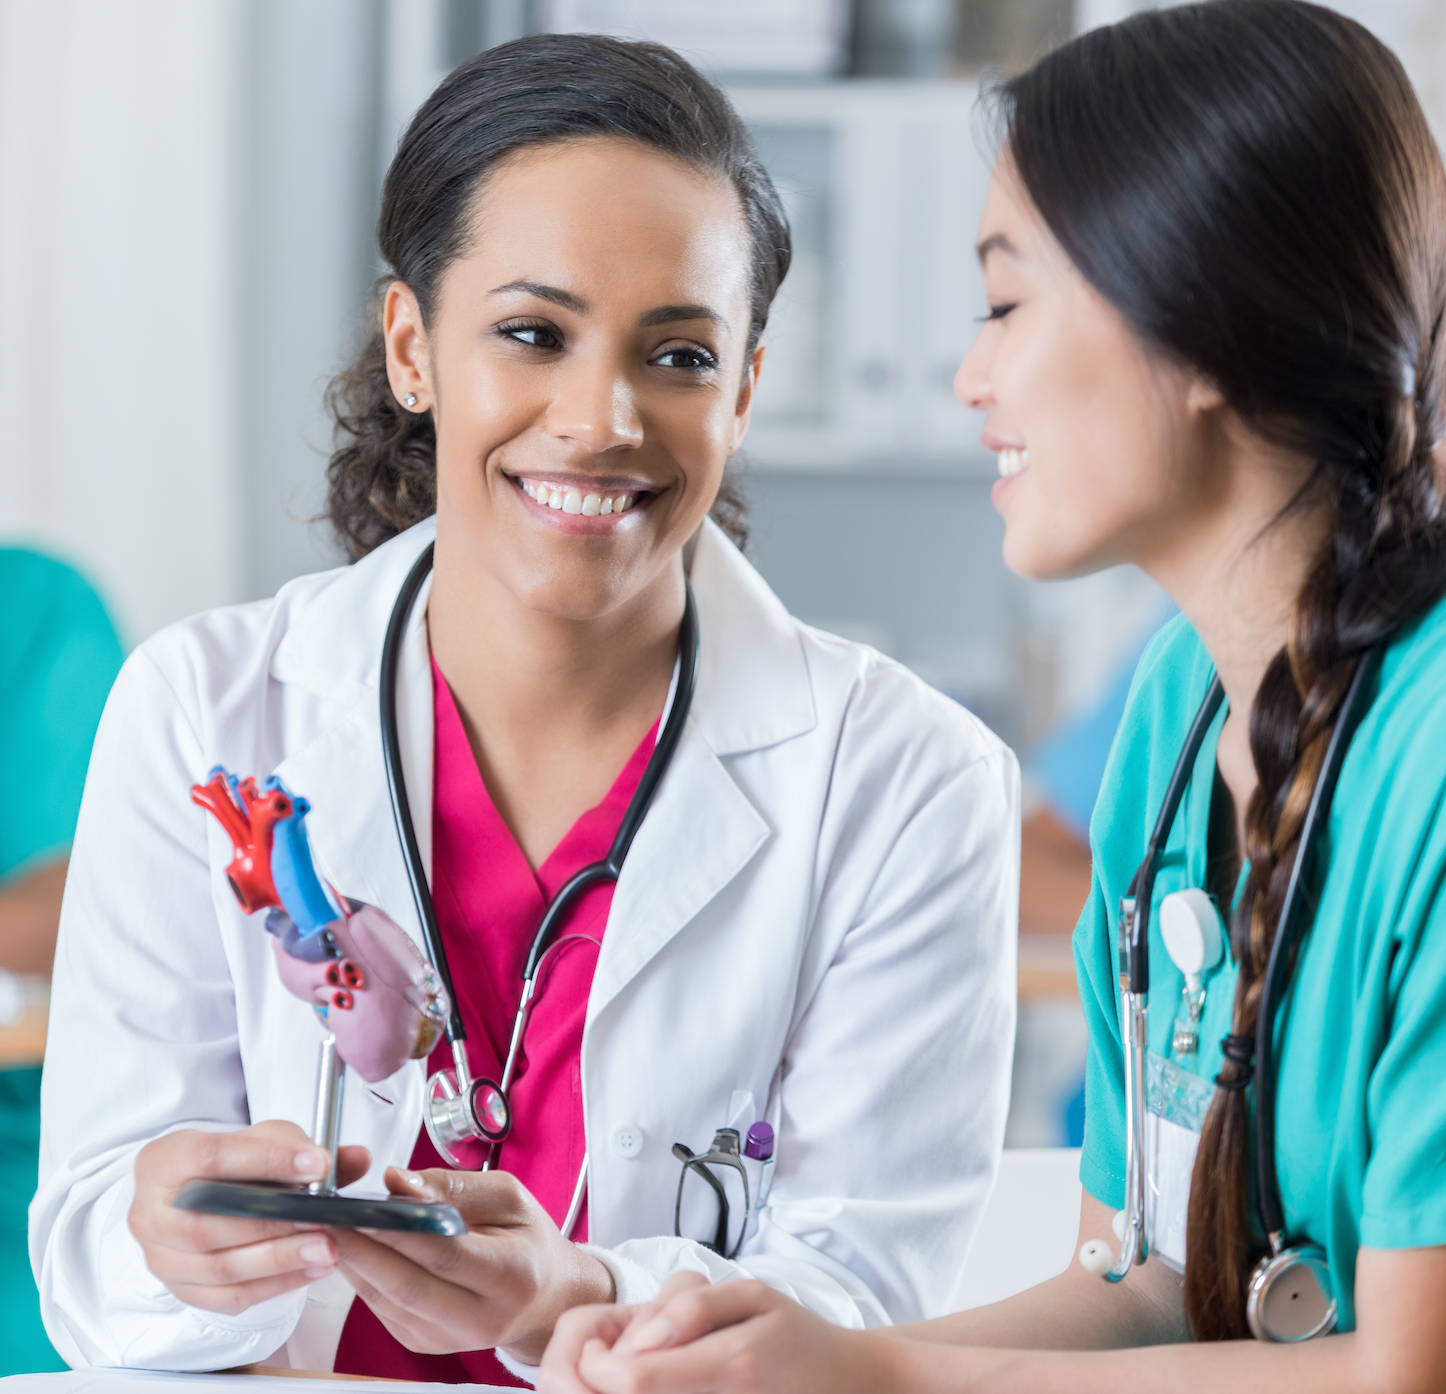 How to Start a Nurse Practitioner Residency at Your Clinic